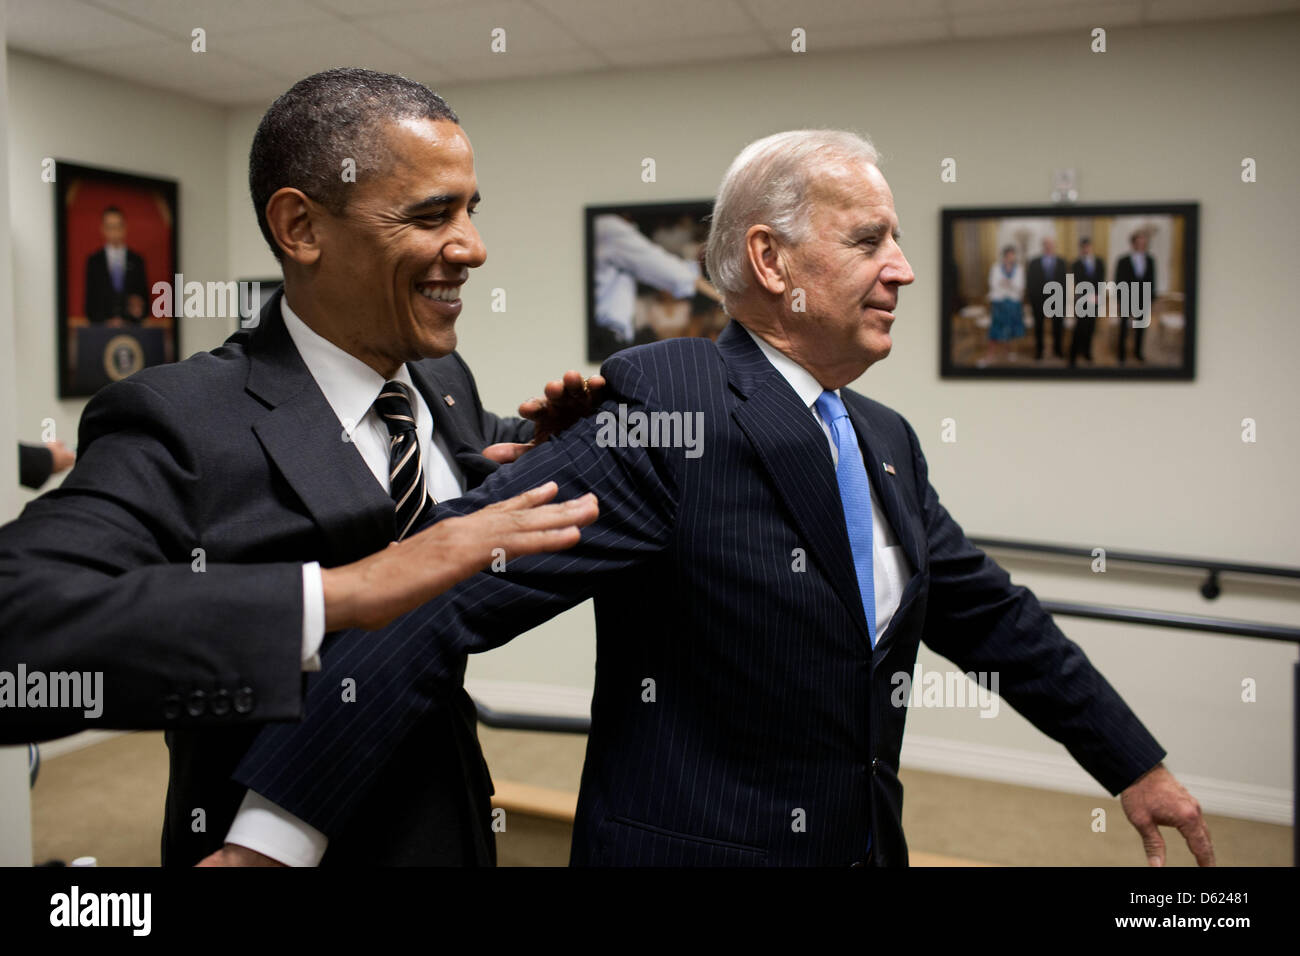 United States President Barack Obama jokes with Vice President Joe Biden backstage before the STOCK Act signing event in the Eisenhower Executive Office Building South Court Auditorium, April 4, 2012. .Mandatory Credit: Pete Souza - White House via CNP Stock Photo